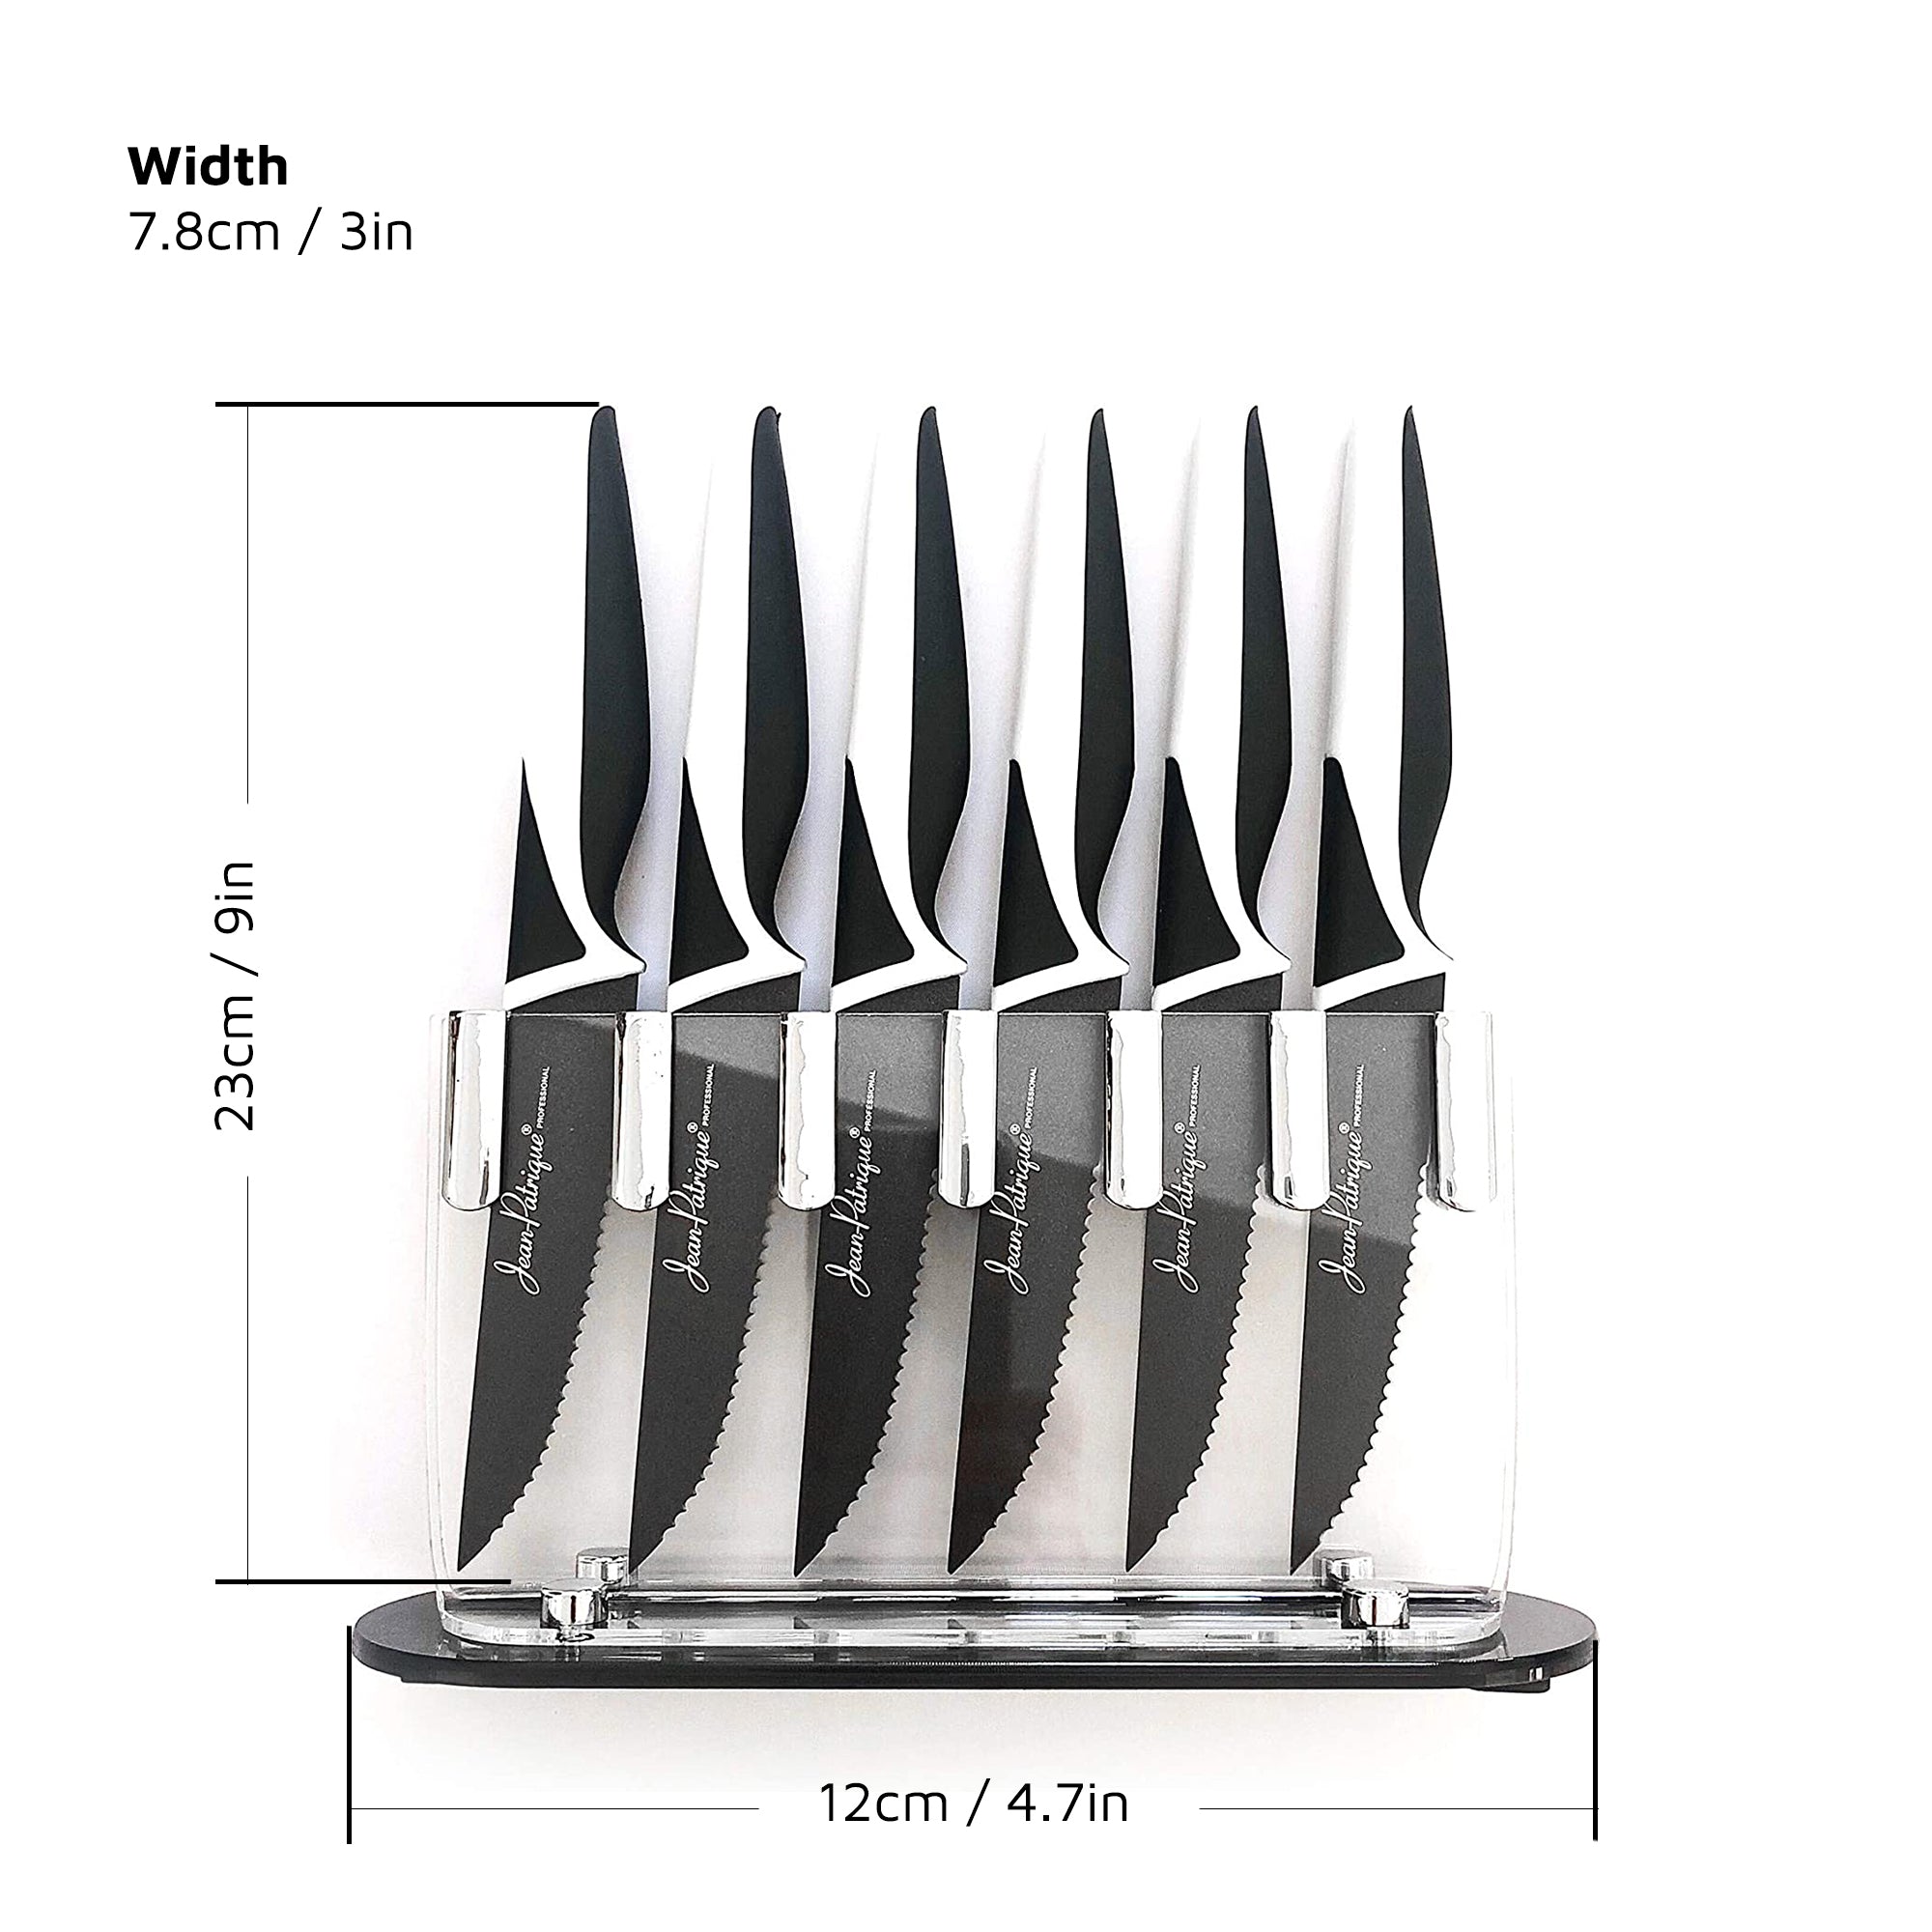 Knife Block Without Knives 16 Slots - by Jean Patrique